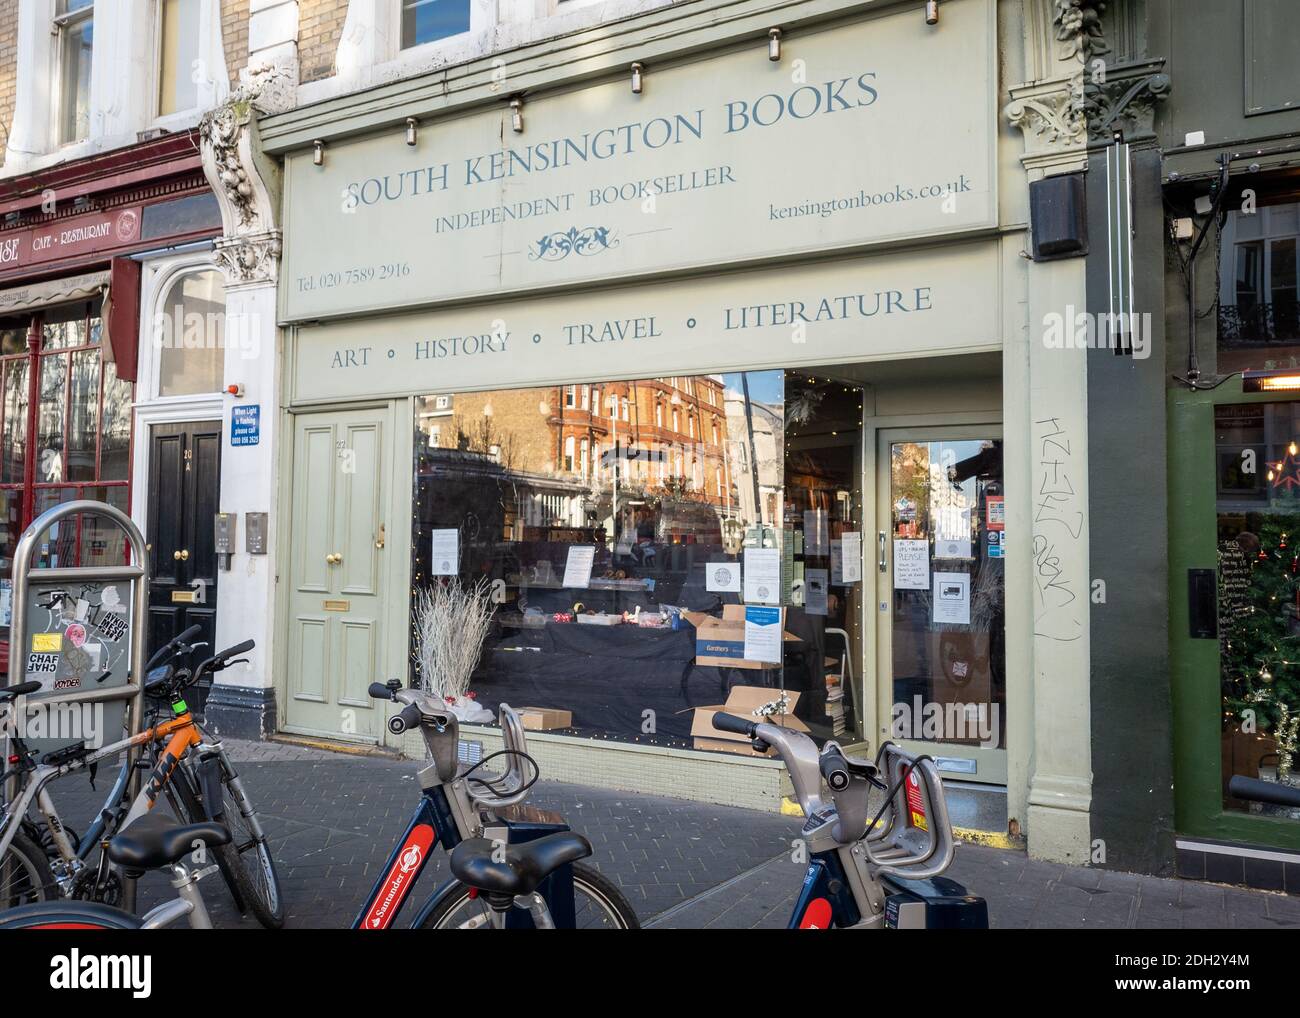 A independent traditional book shop in South Kensington which are fast disappearing being hugely affected by online digital books. Stock Photo